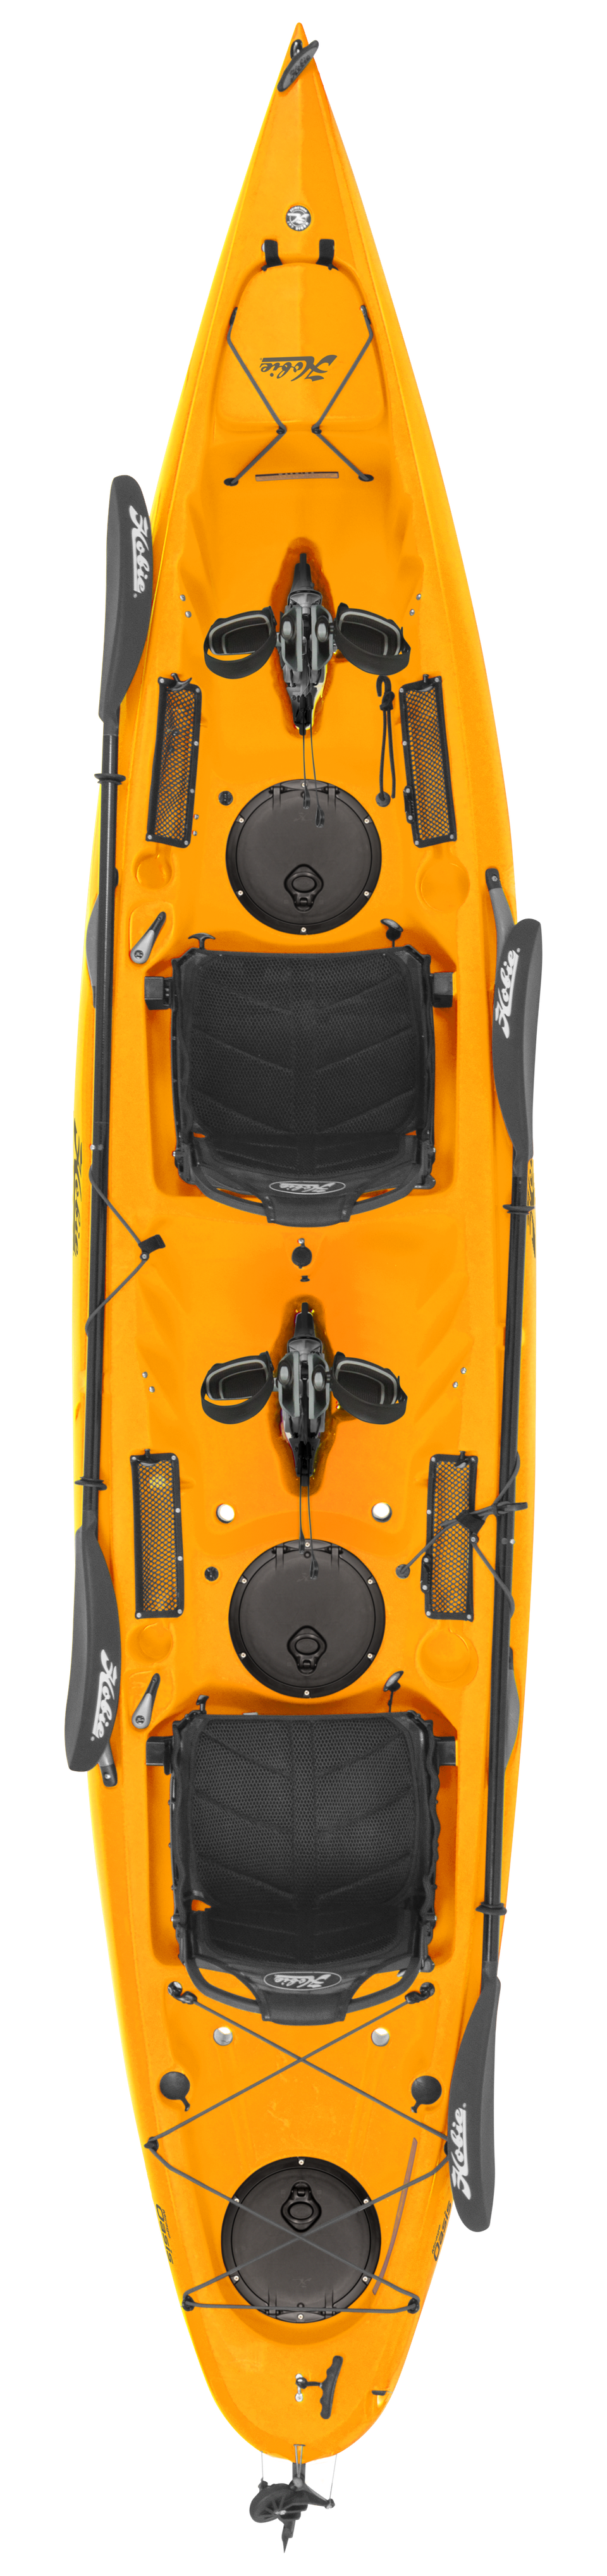 A performance-minded yellow Hobie Mirage Oasis 14.6 kayak with black paddles, featuring Mirage MD180 Drives.